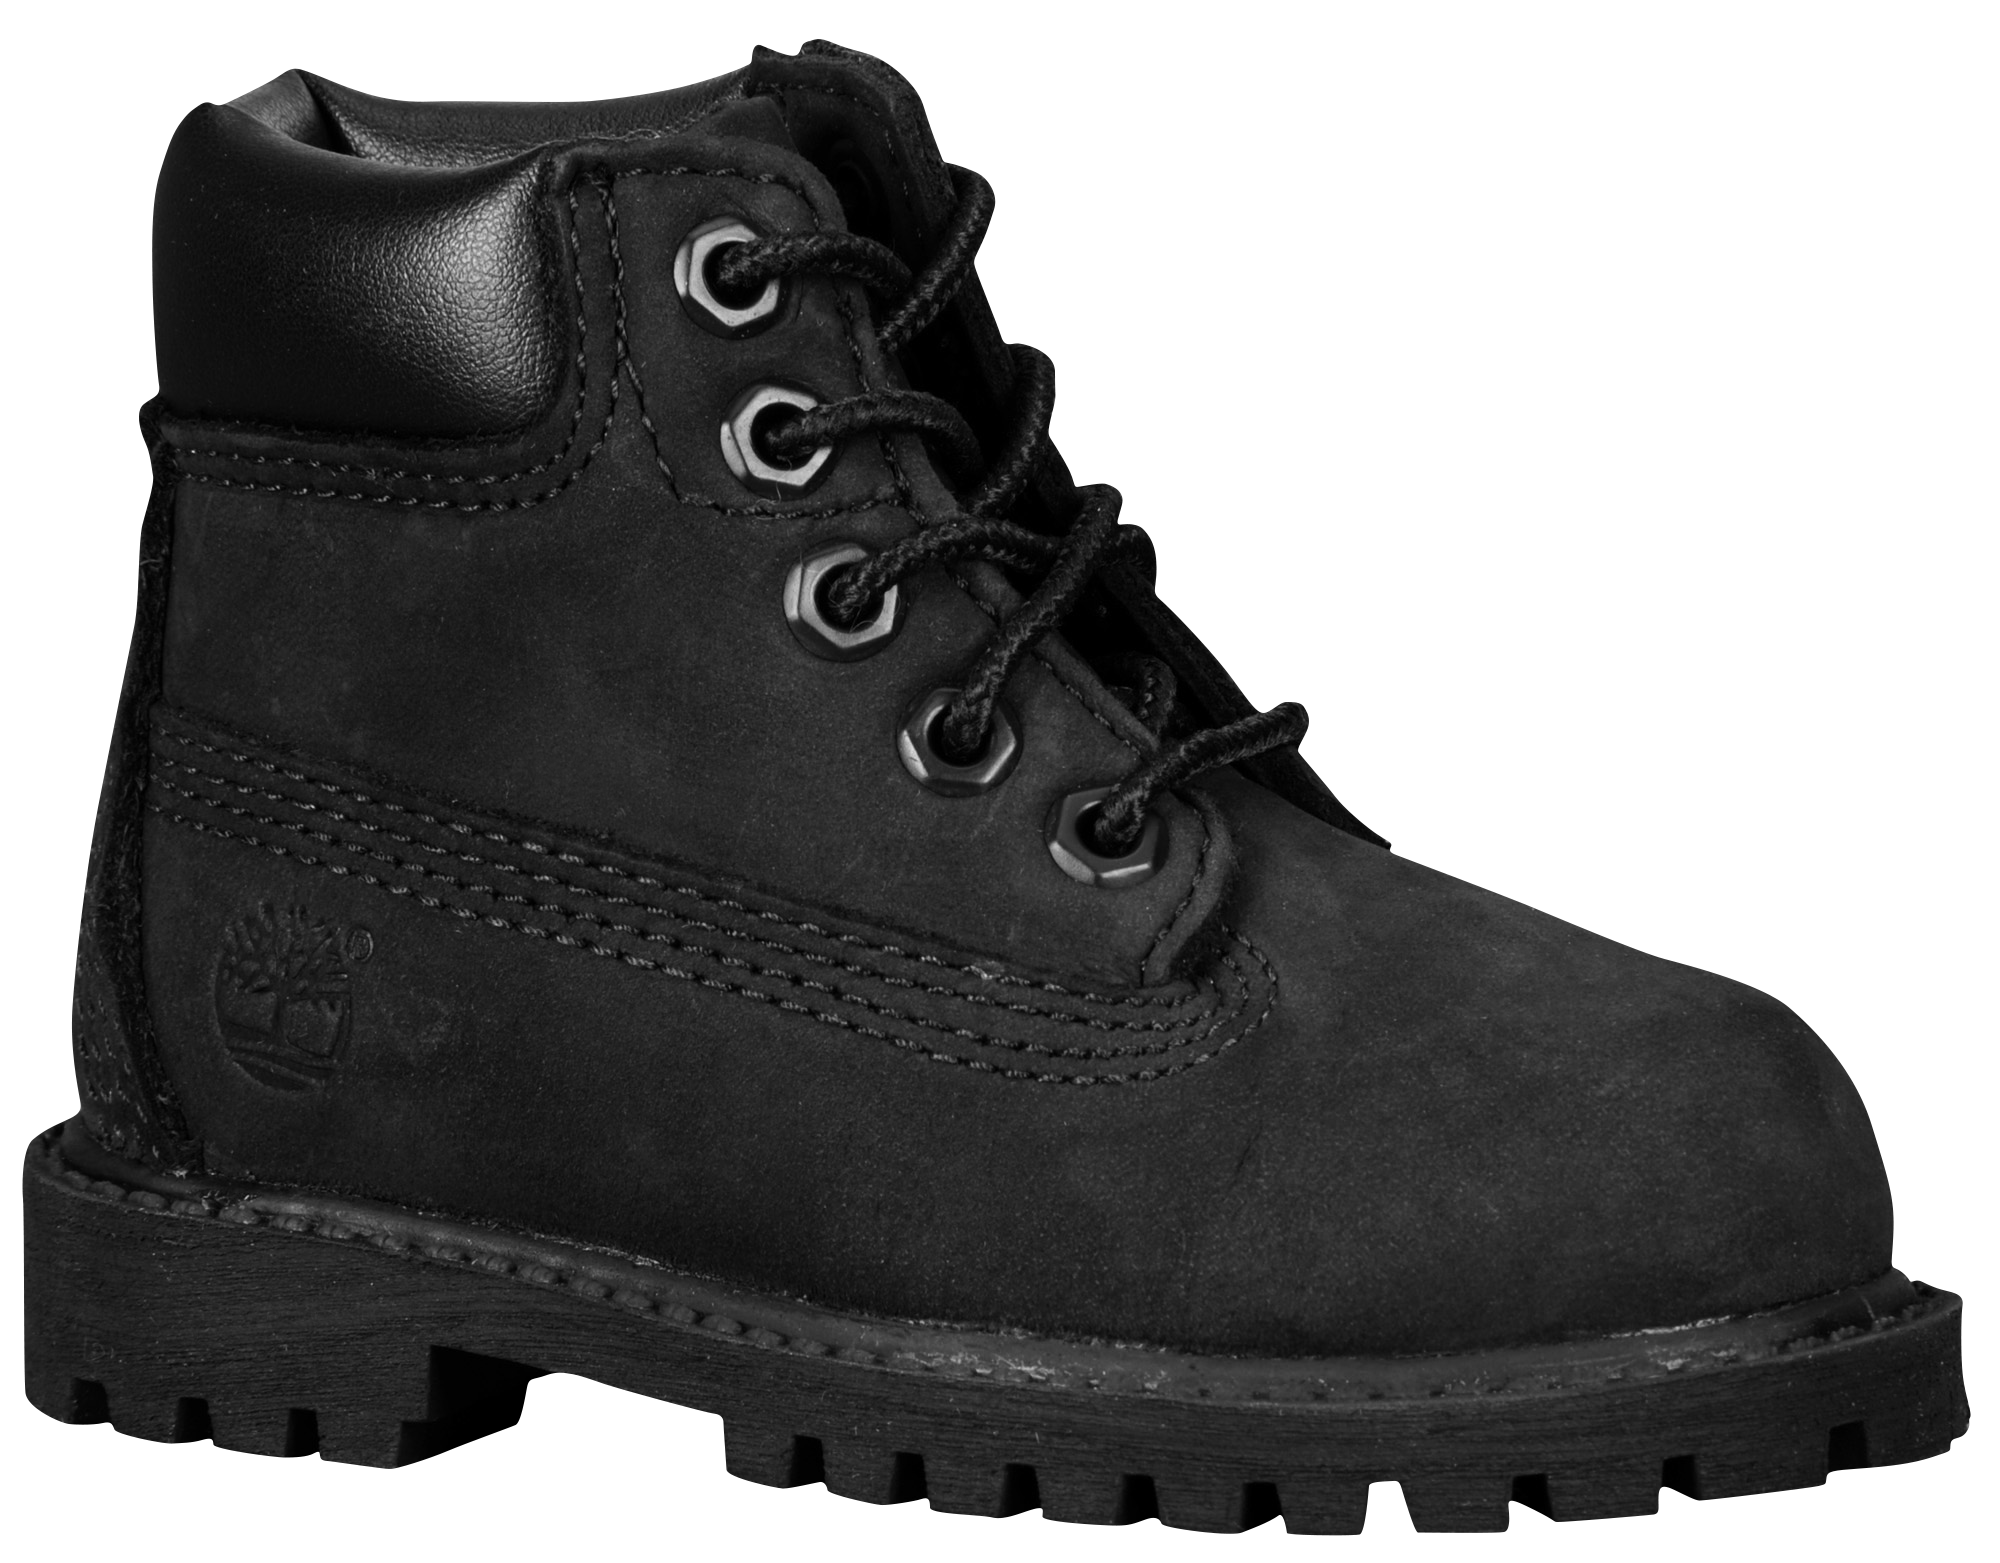 exegese breedte Knop Timberland 6" Premium Waterproof Boots - Boys' Toddler | Upper Canada Mall